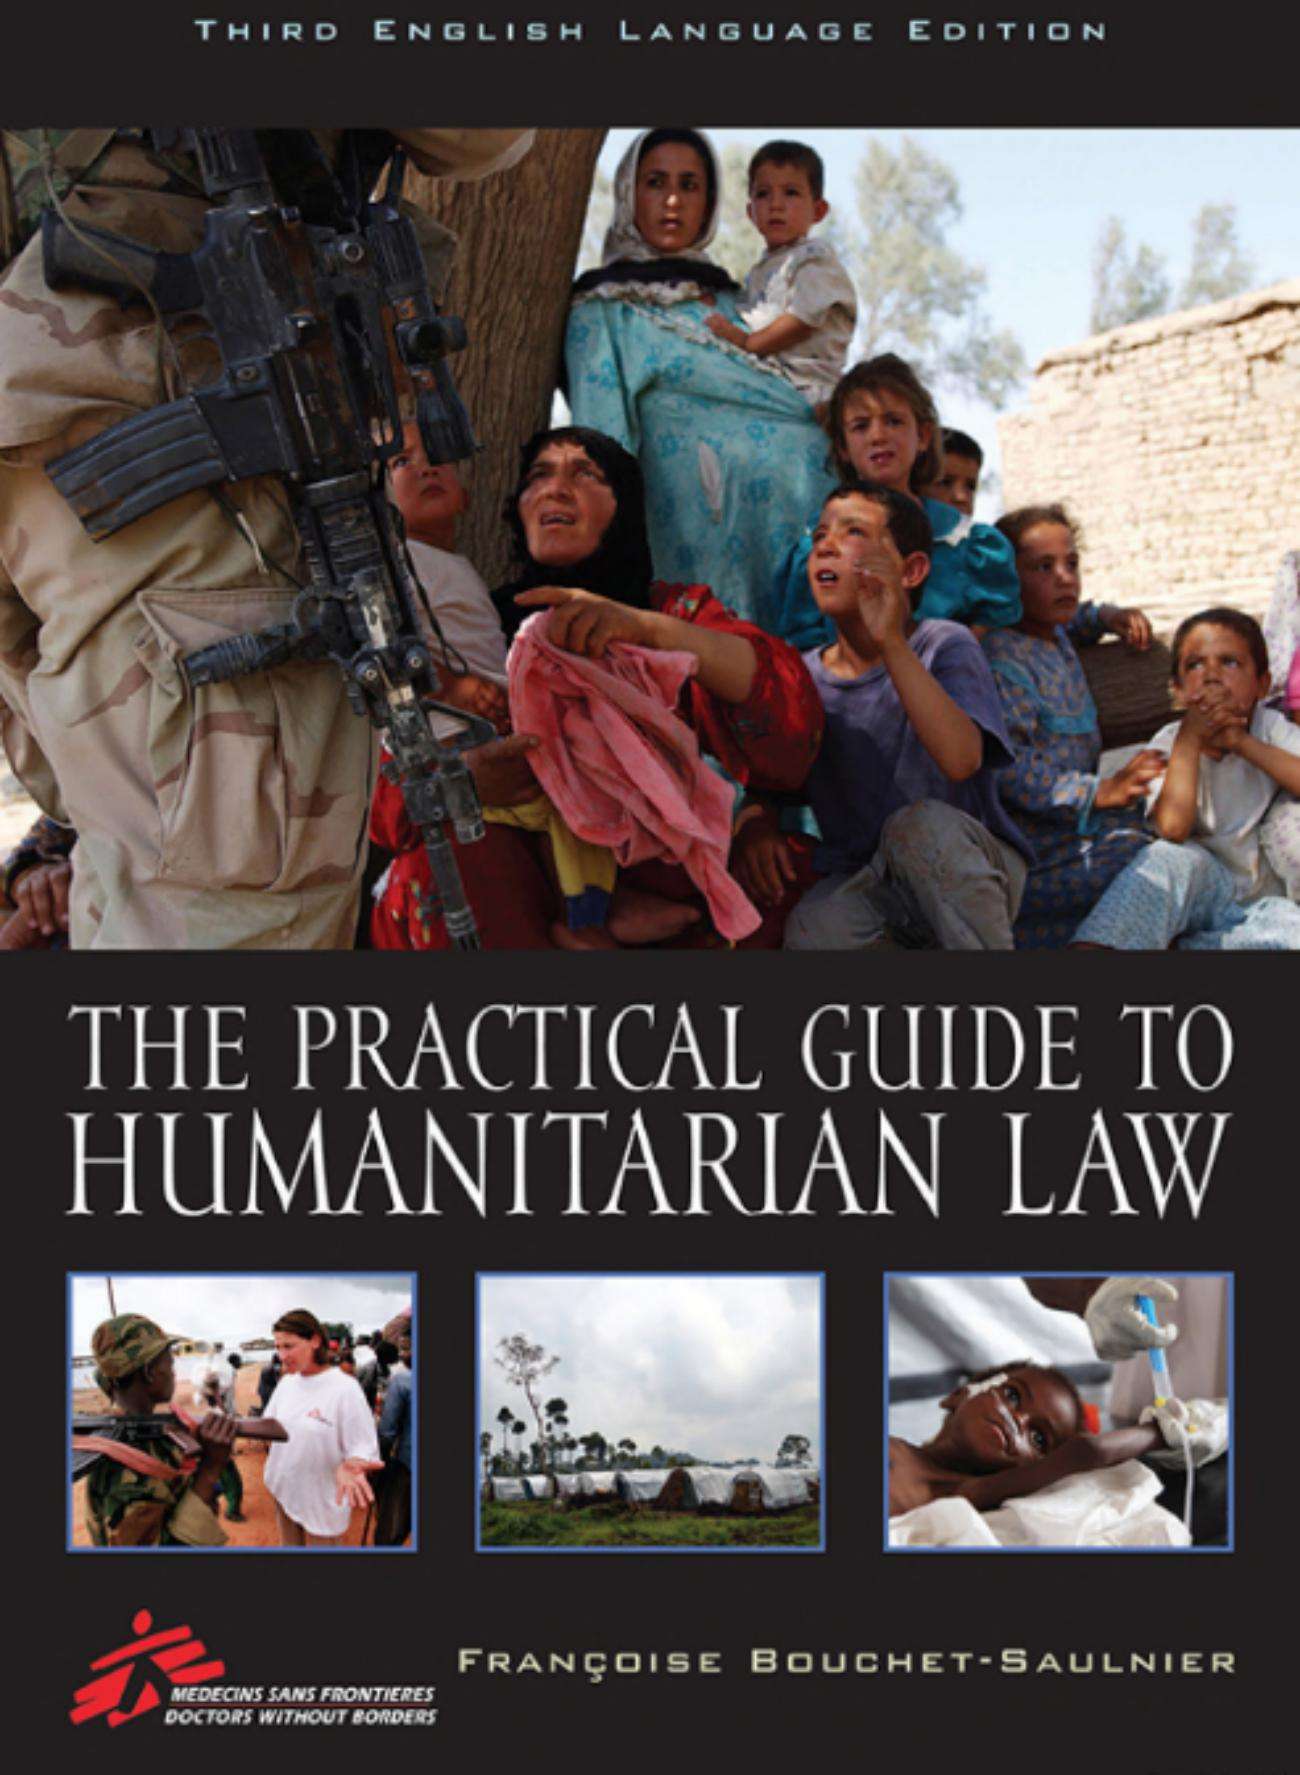 "The Practical Guide to Humanitarian Law" Third English Language Edition book cover